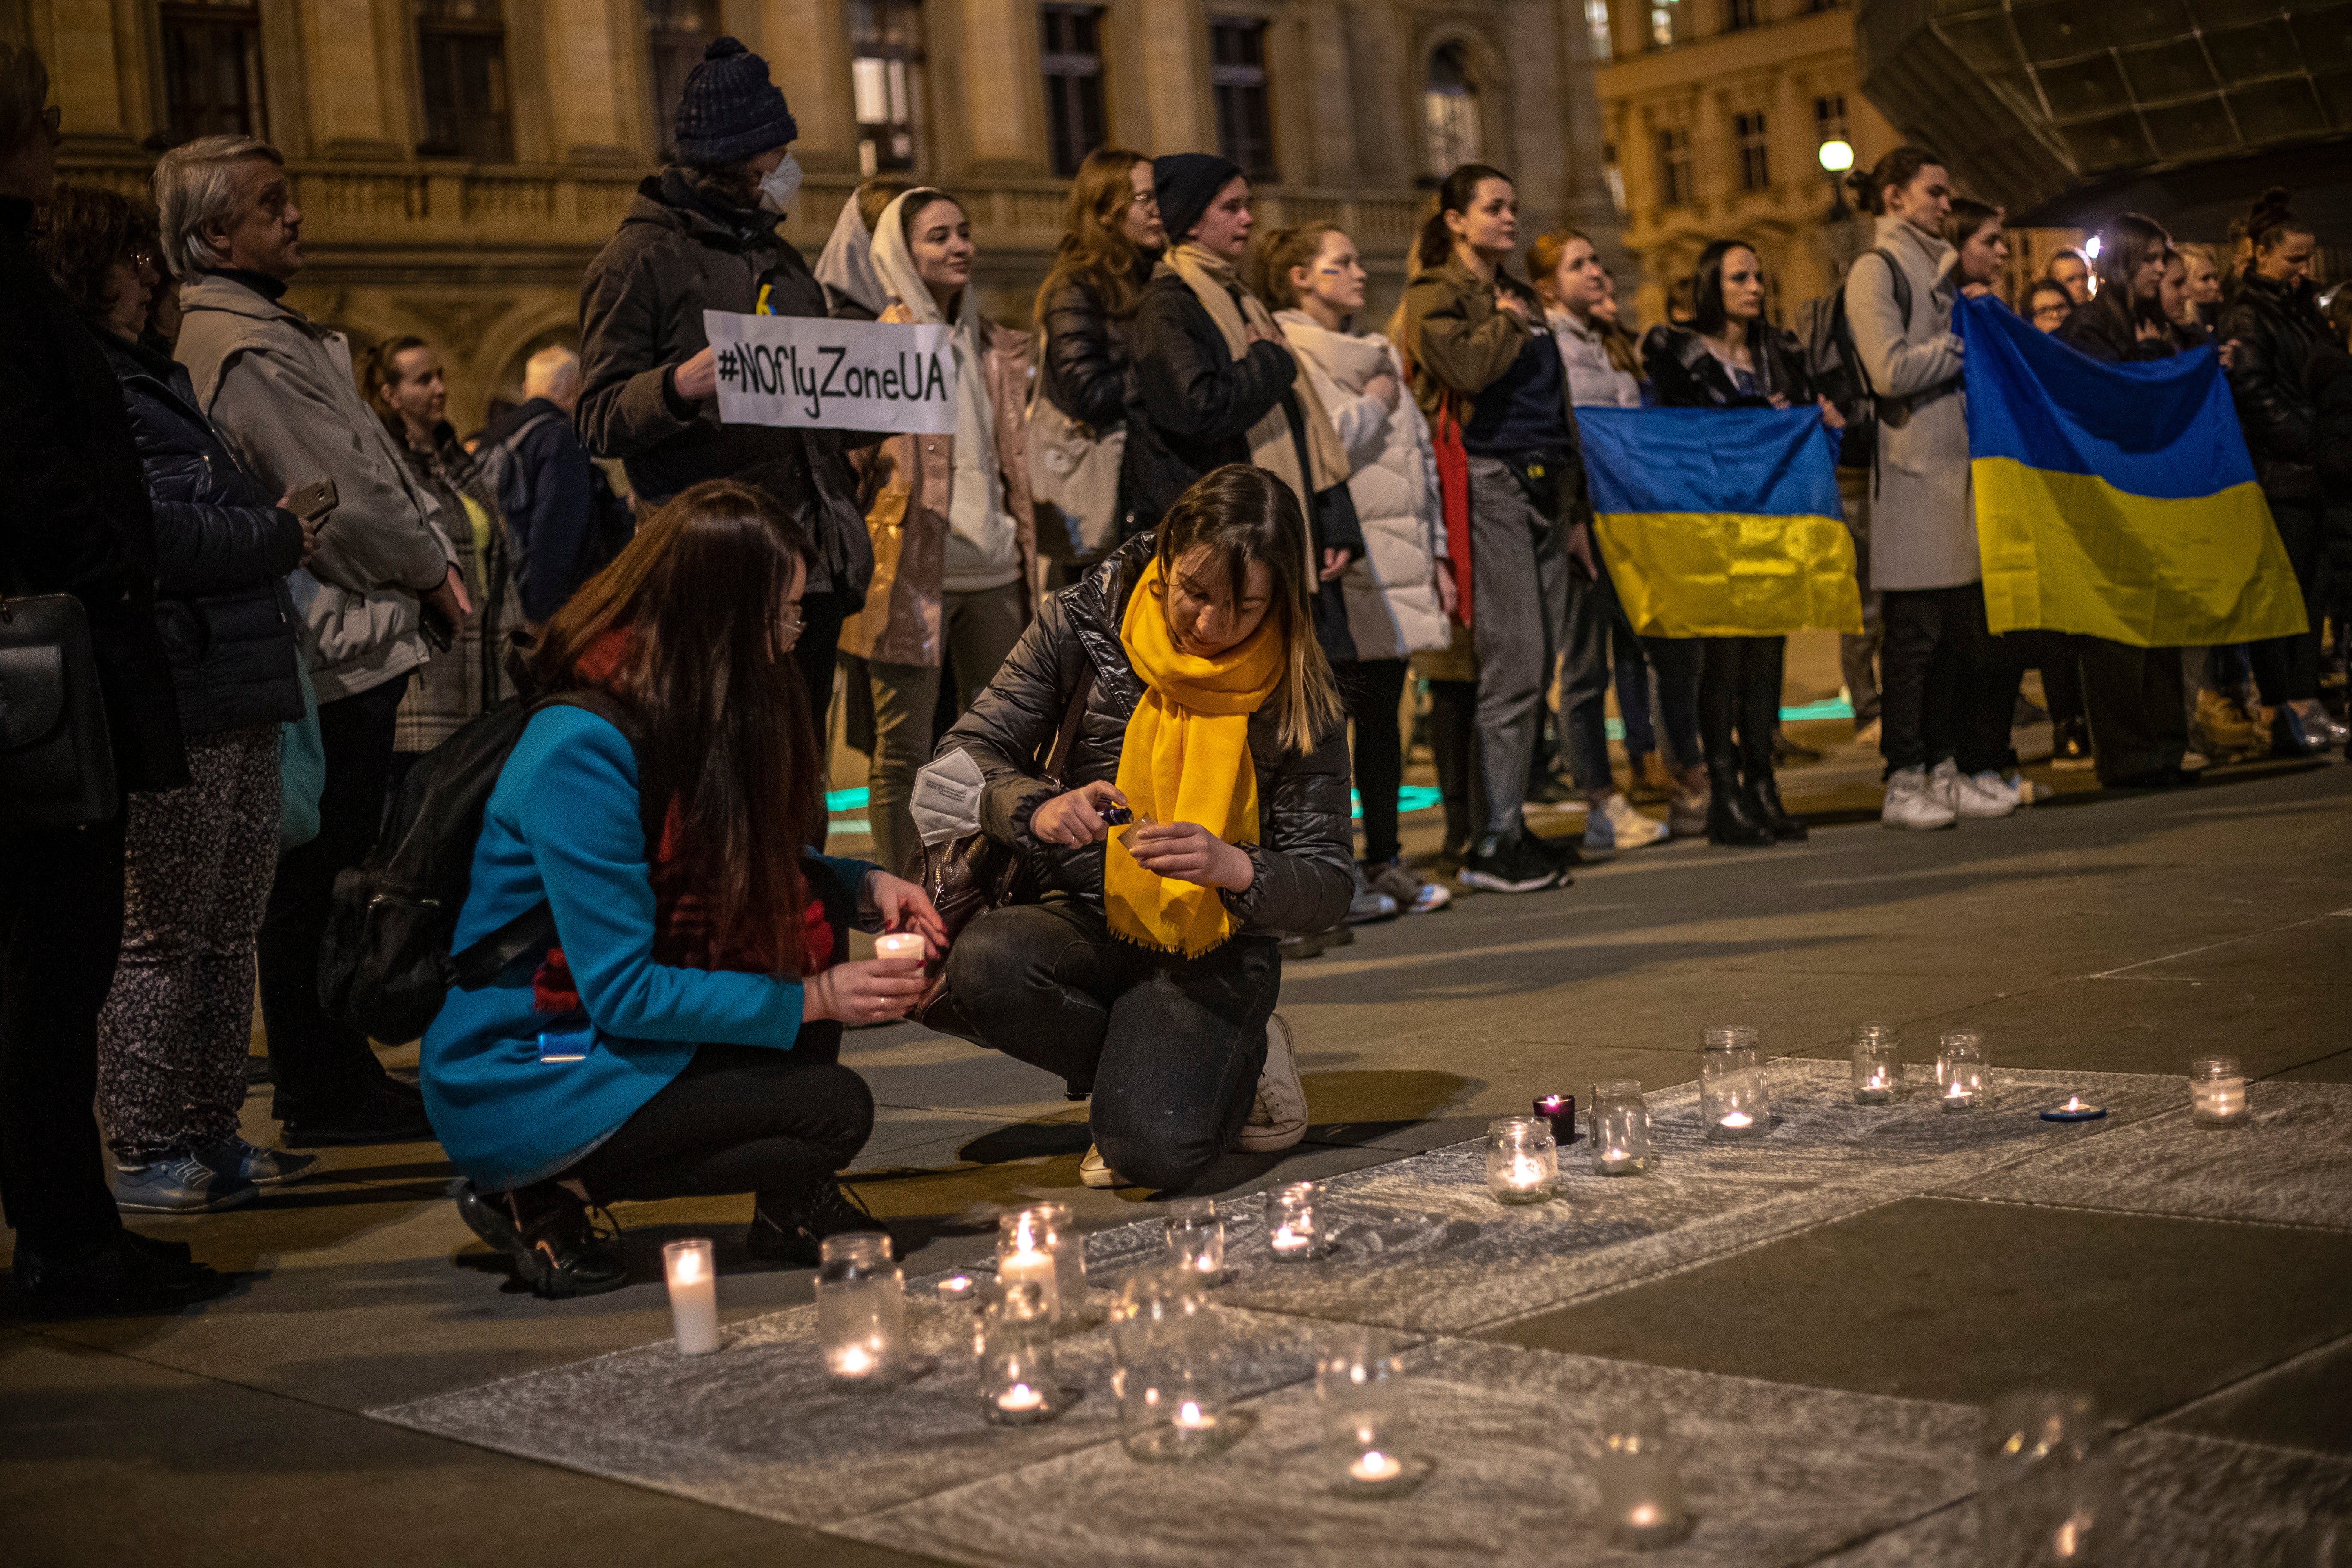 People at a peace rally in Prague light candles for those killed in the Mariupol theatre